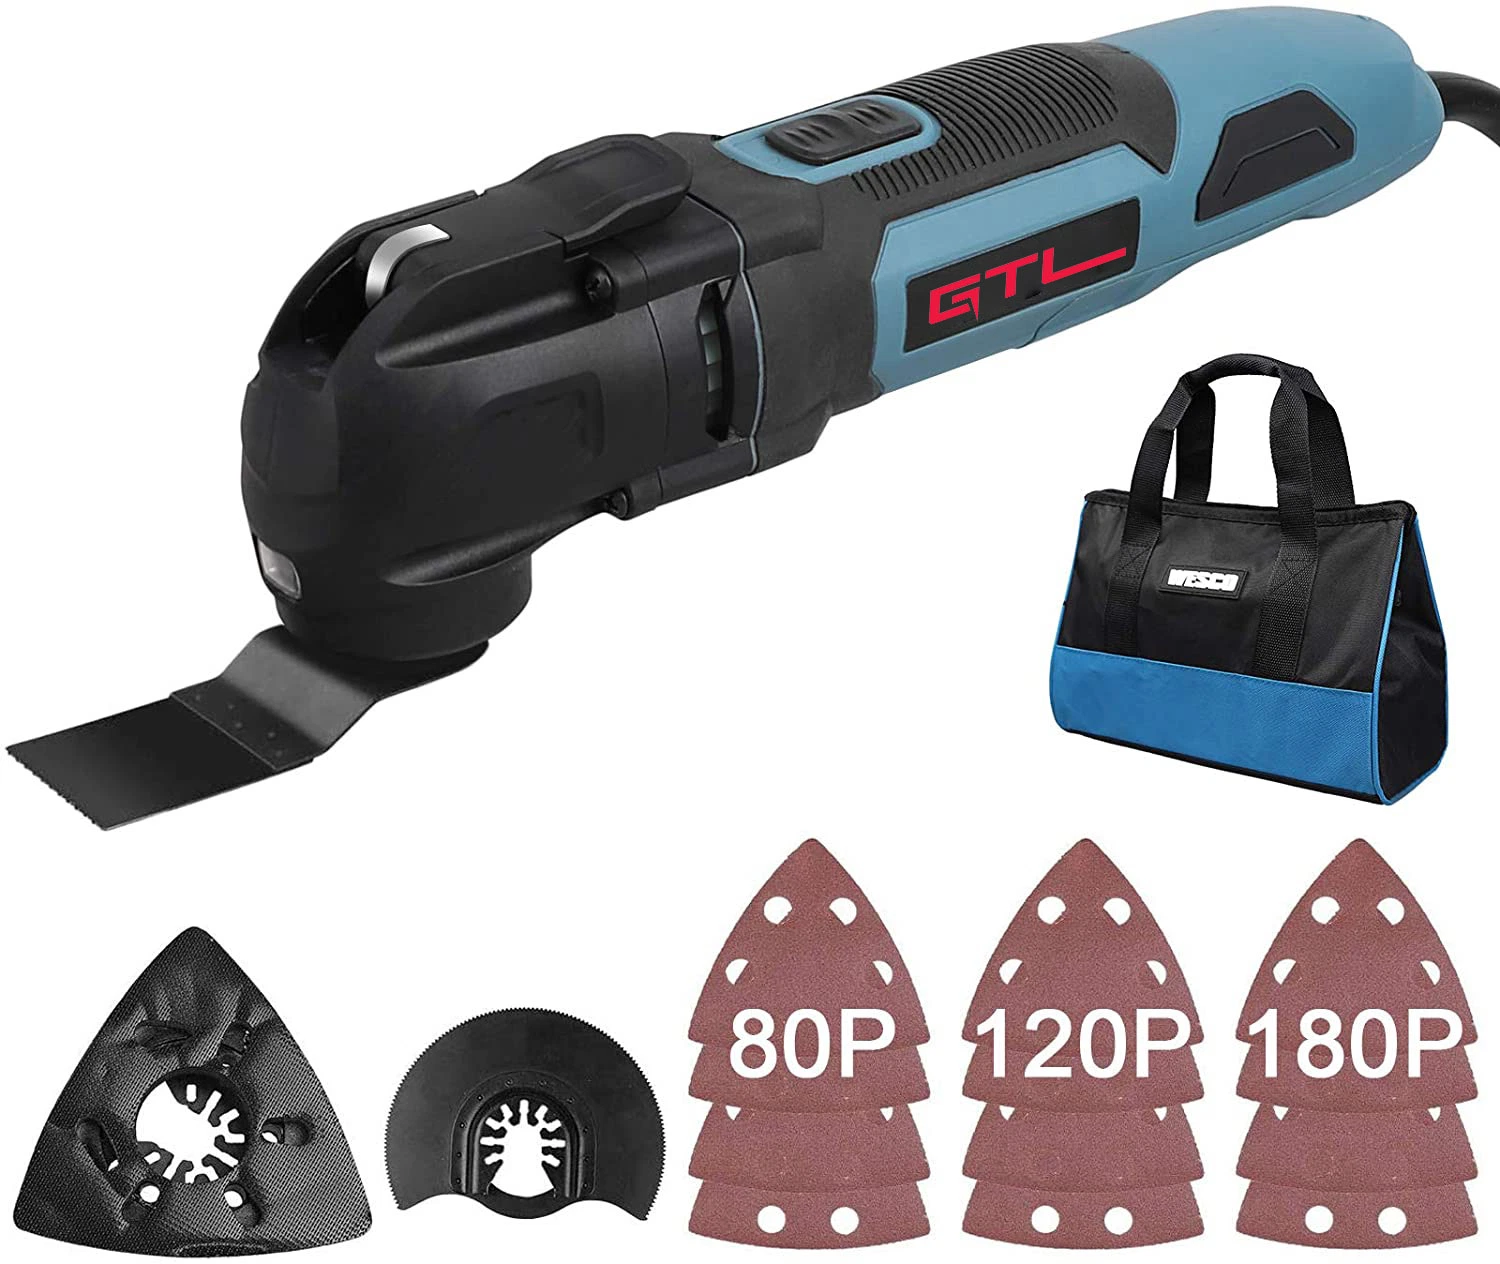 Electric Home Rechargeable Power Tools Oscillating Multi-Function Tools (MFT006)